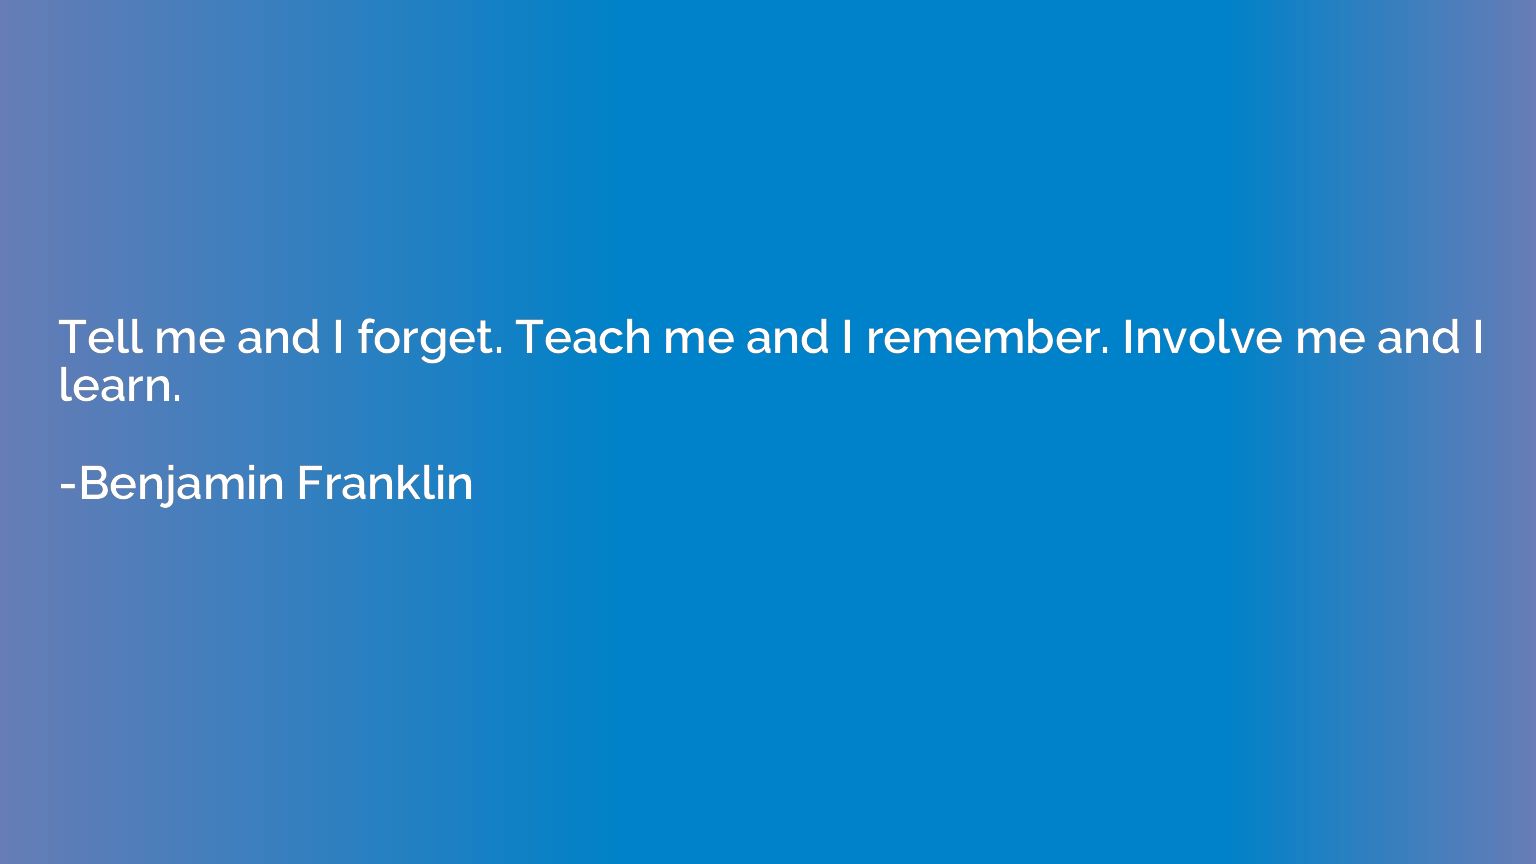 Tell me and I forget. Teach me and I remember. Involve me an